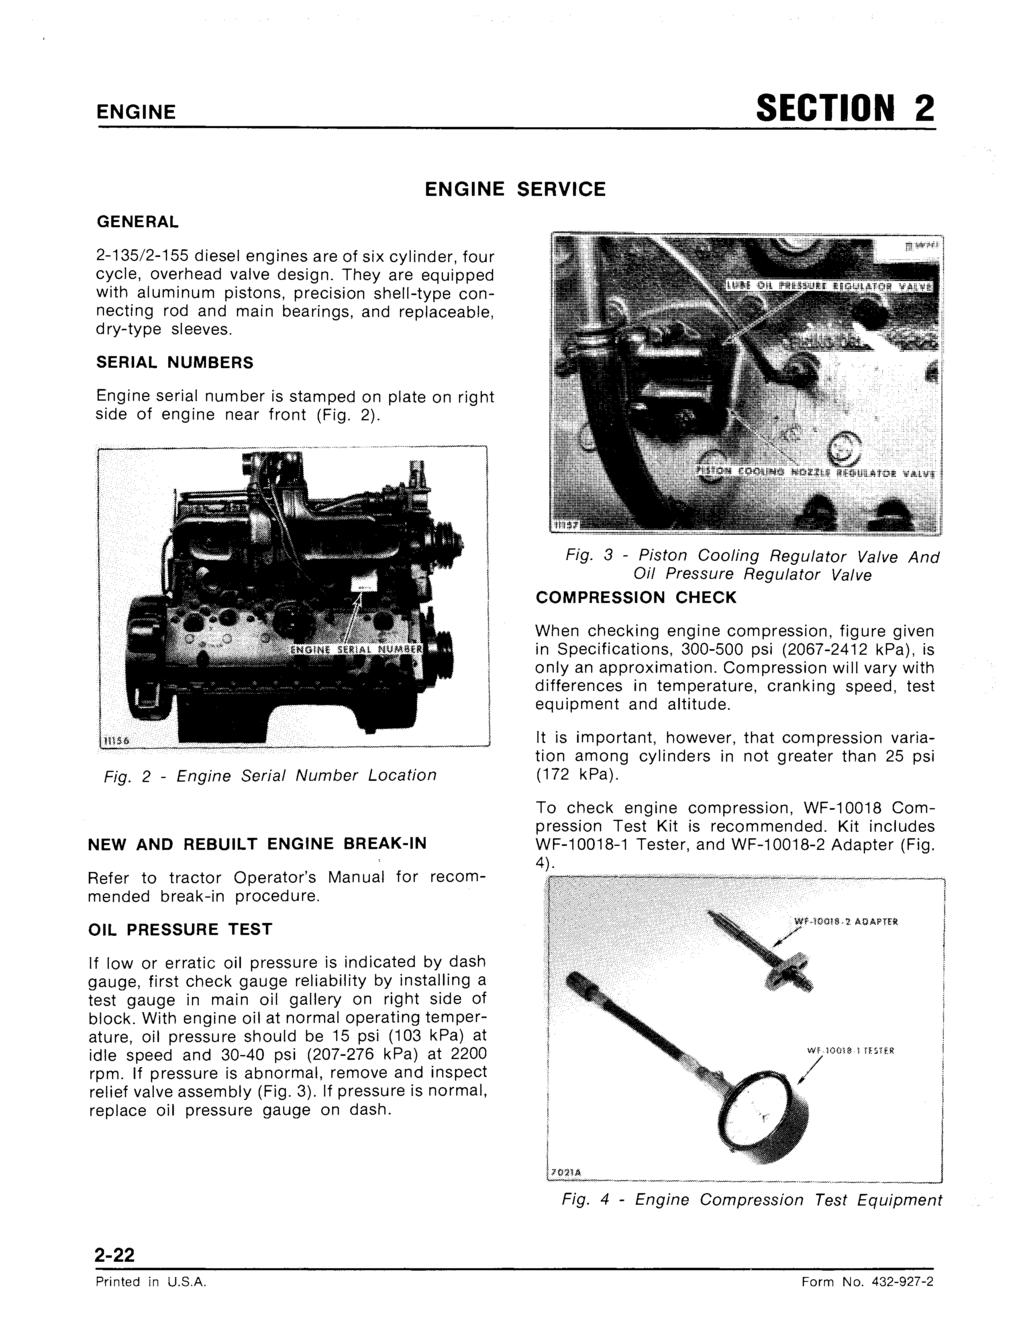 ENGINE SECTION 2 GENERAL 2-135/2-155 diesel engines are of six cylinder, four cycle, overhead valve design.